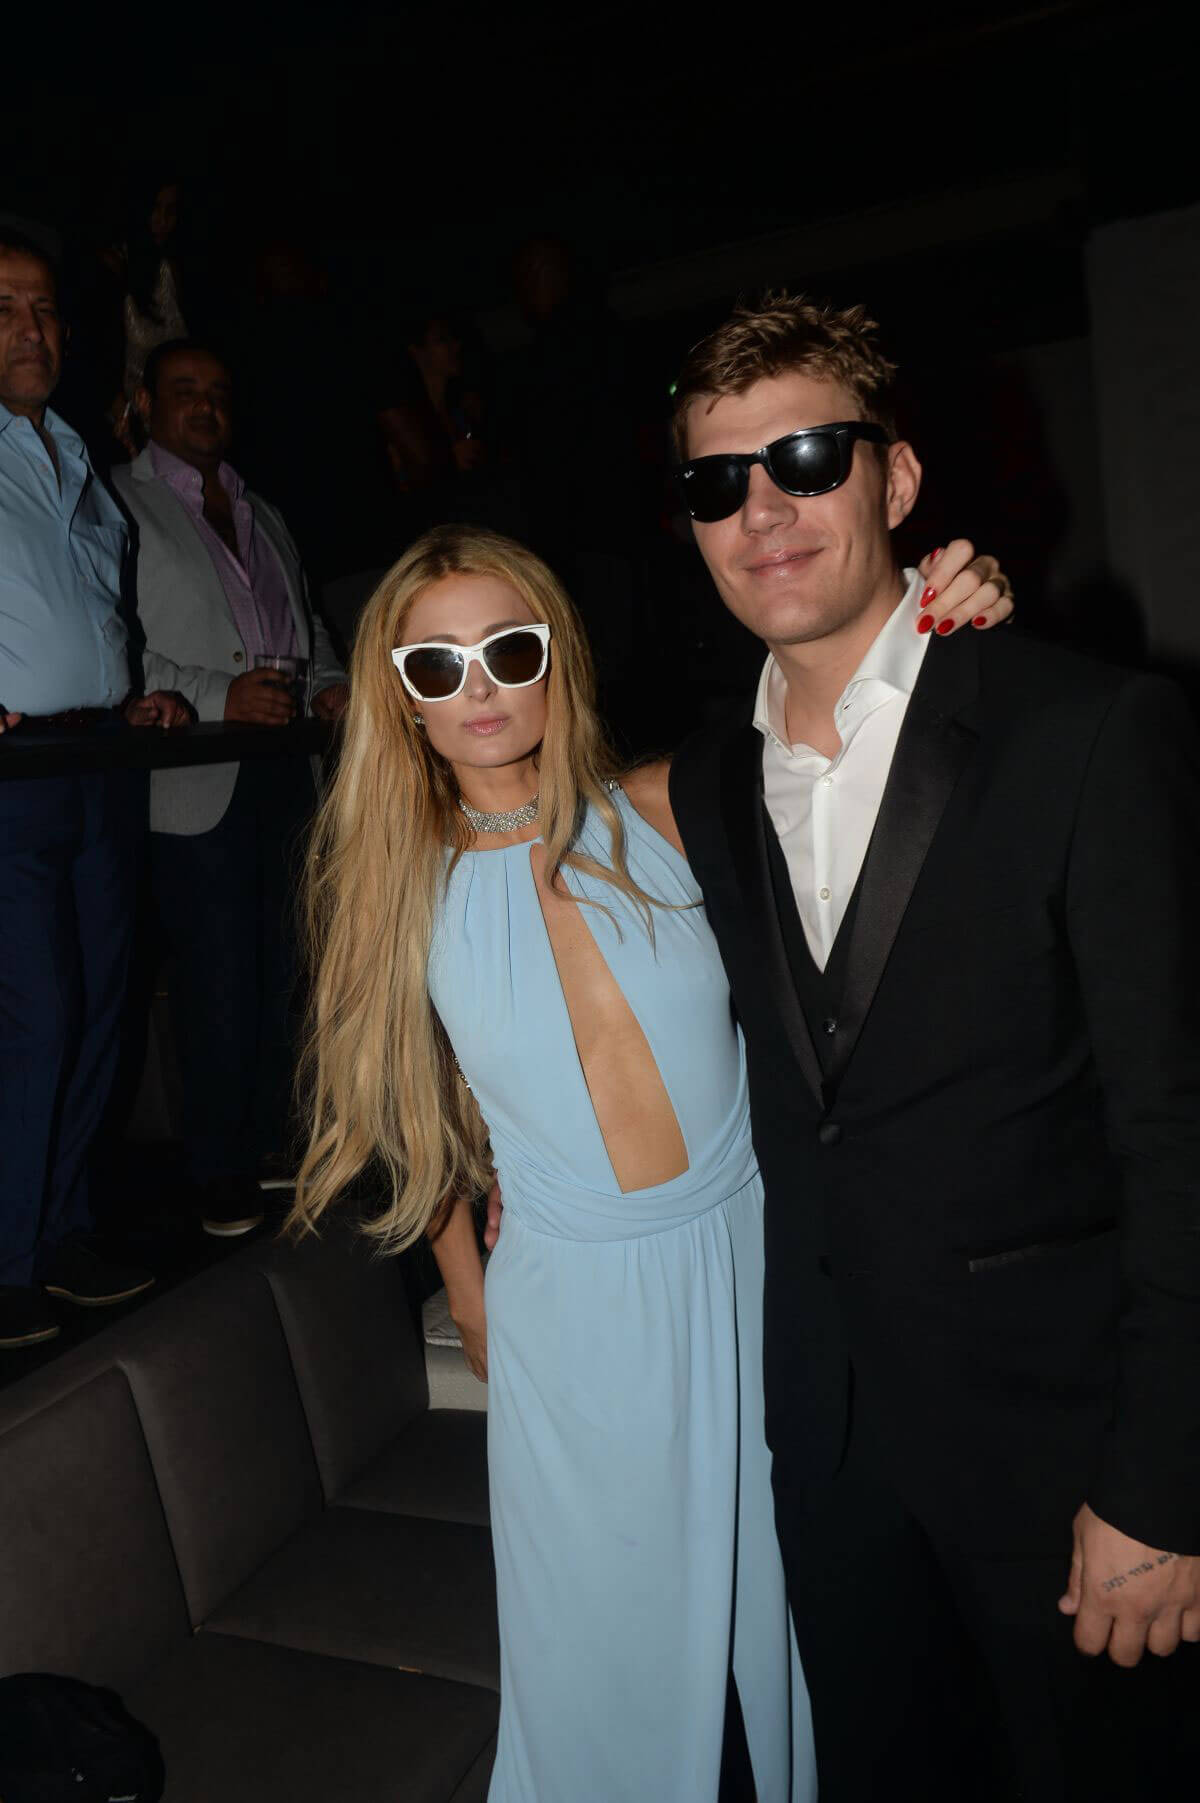 Paris Hilton and Chris Zylka at Akon Concert in Cannes